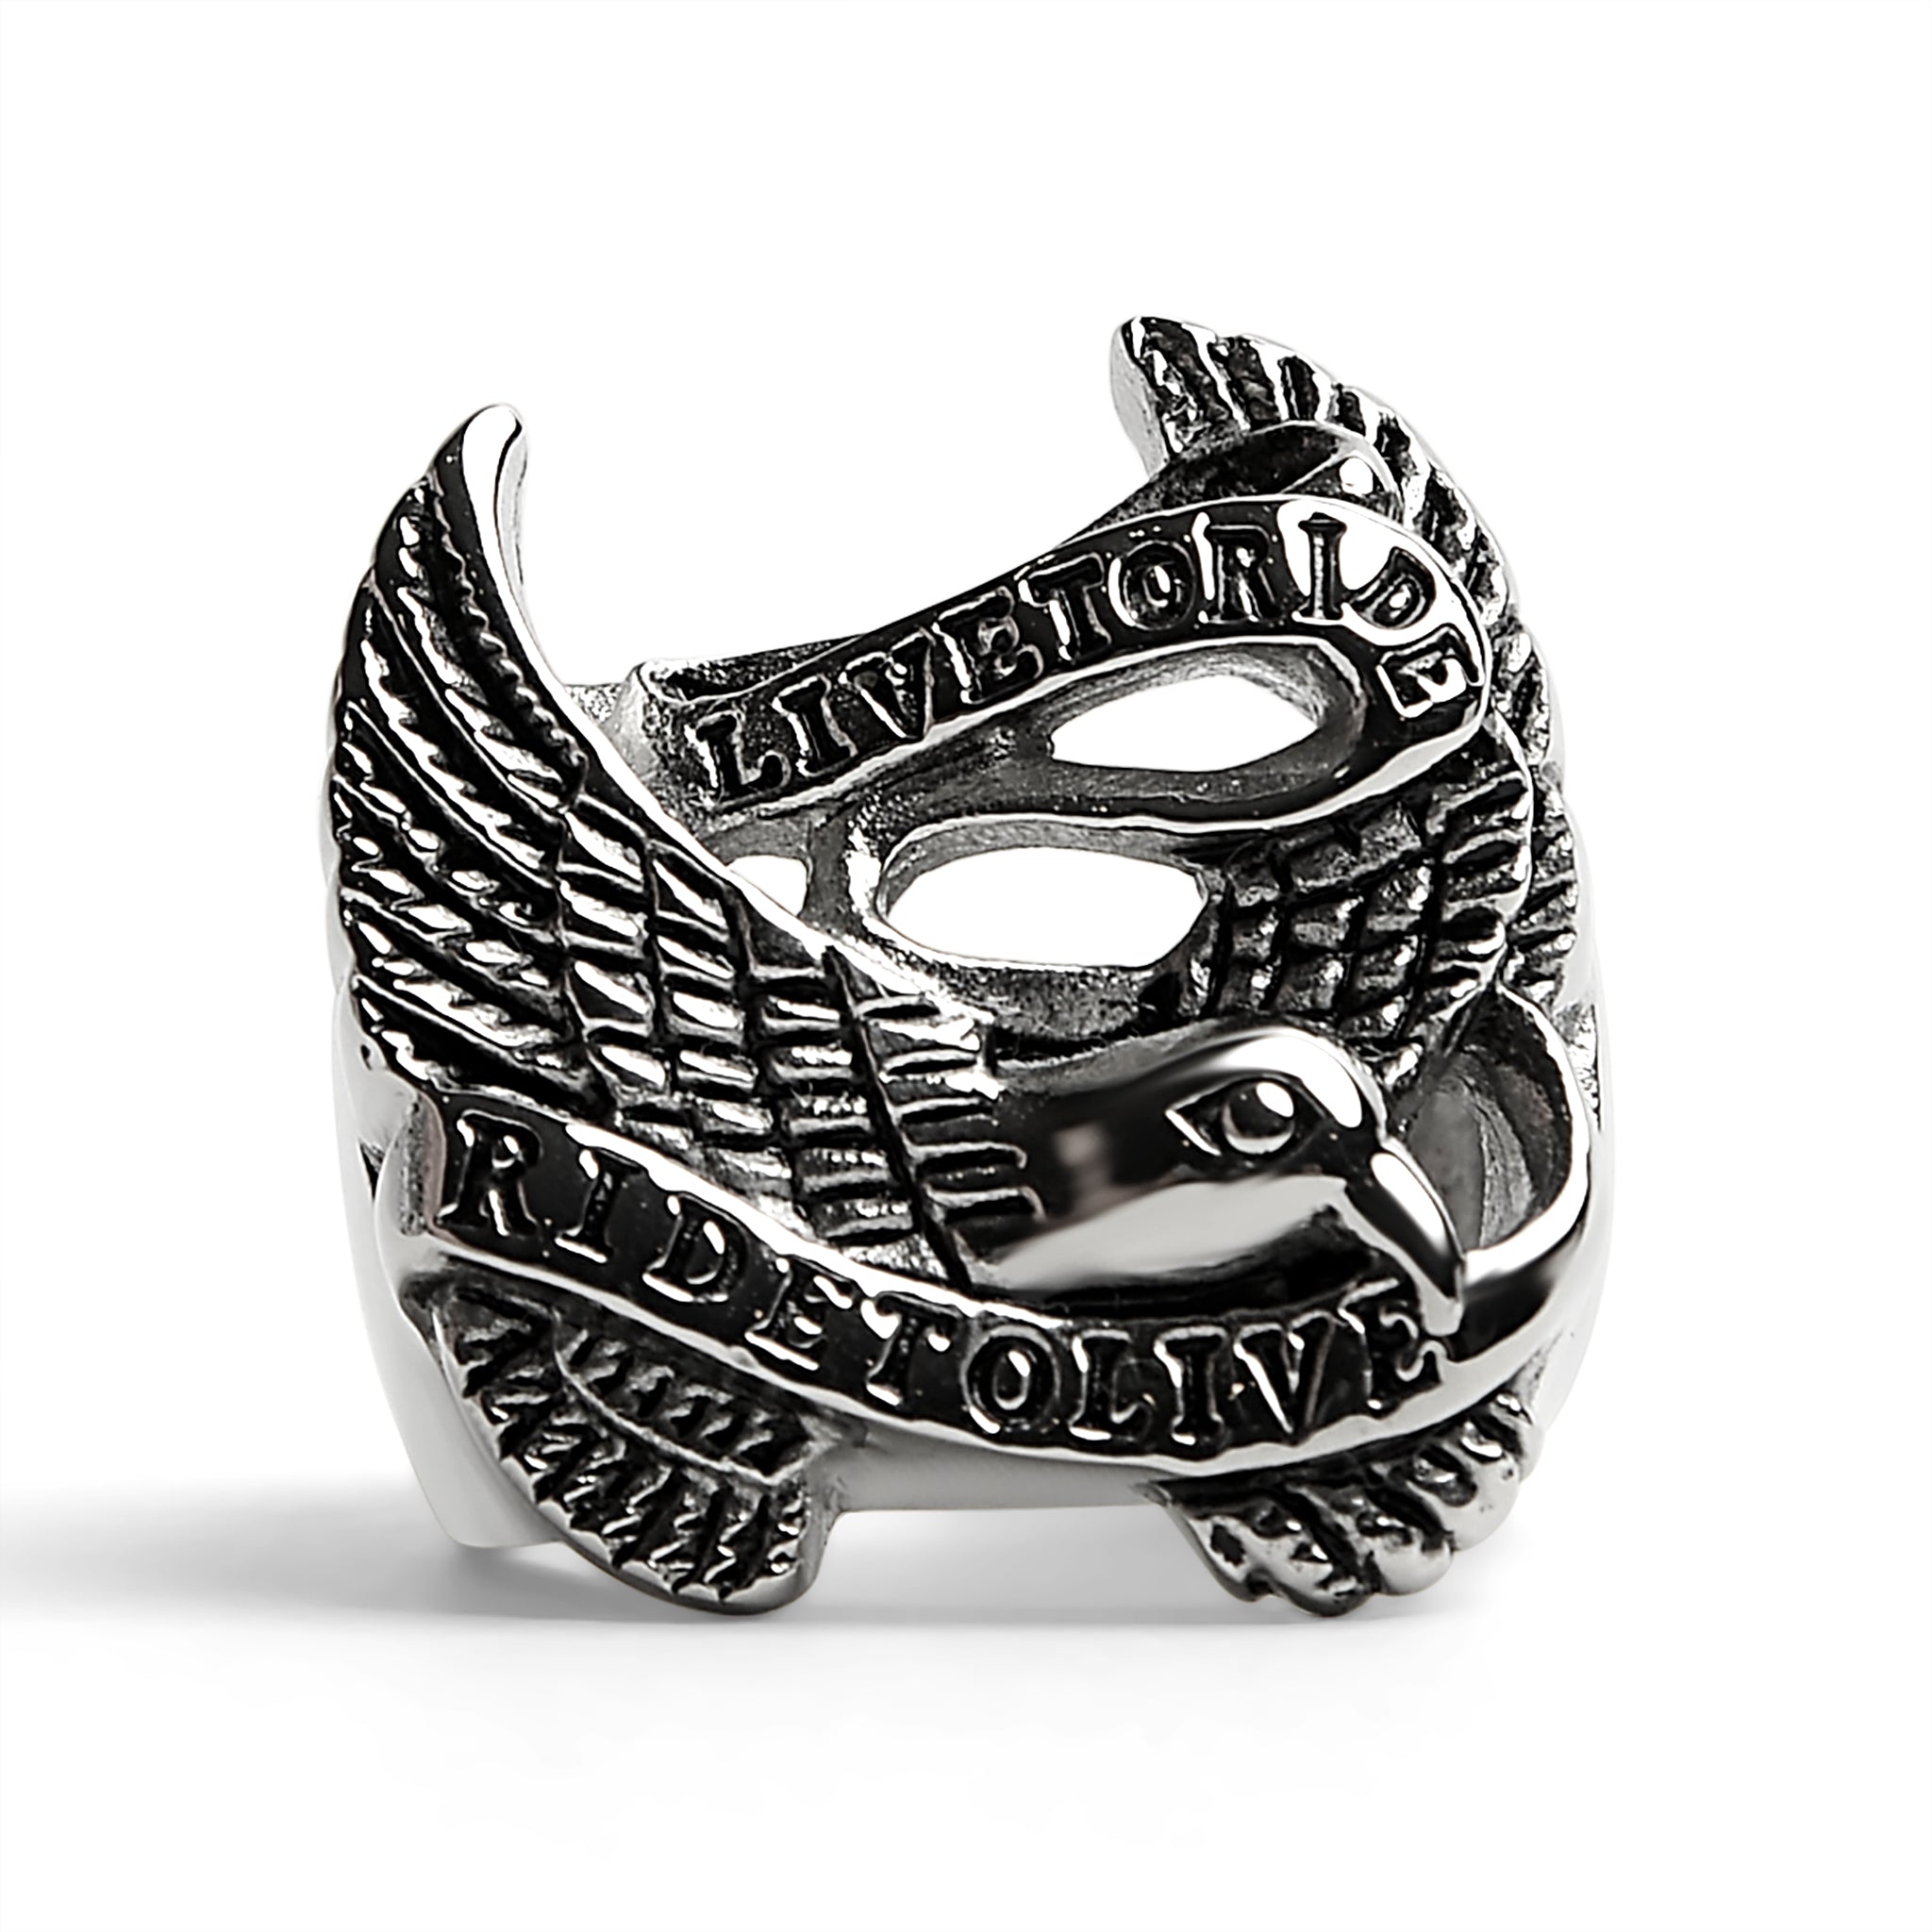 ''Stainless Steel ''''Live To Ride'''' ''''Ride To Live'''' Eagle BIKER RING / SCR3077''